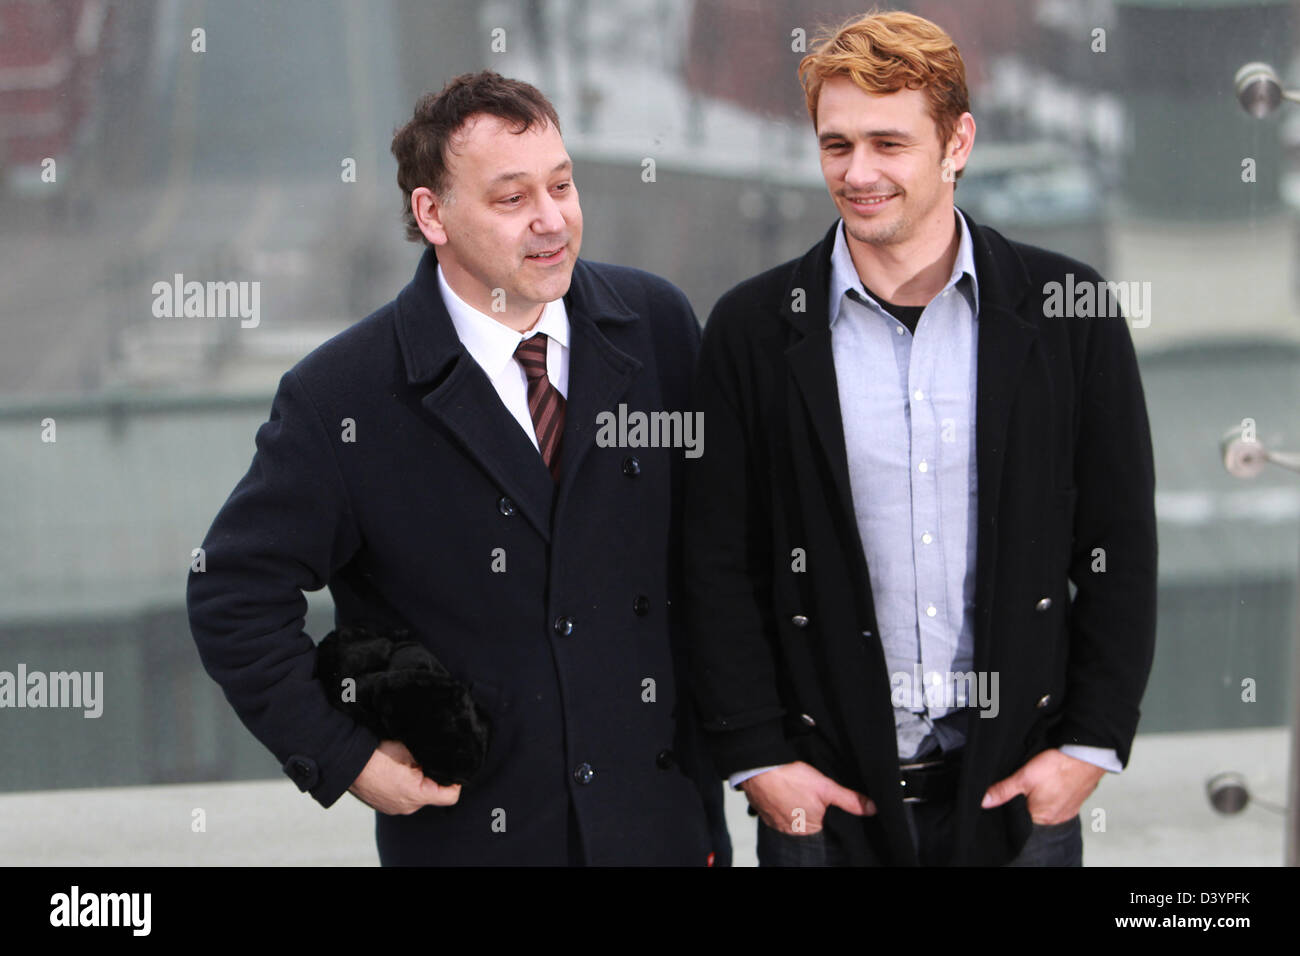 Moscow, Russia. 27th February 2013.  Pictured: l-r American film director Sam Raimi and actor James Franco at the photocall to promote Russian premier of the Oz the Great and Powerful. (Credit Image: Credit:  Nata Nechaeva/PhotoXpress/ZUMAPRESS.com/Alamy Live News) Stock Photo